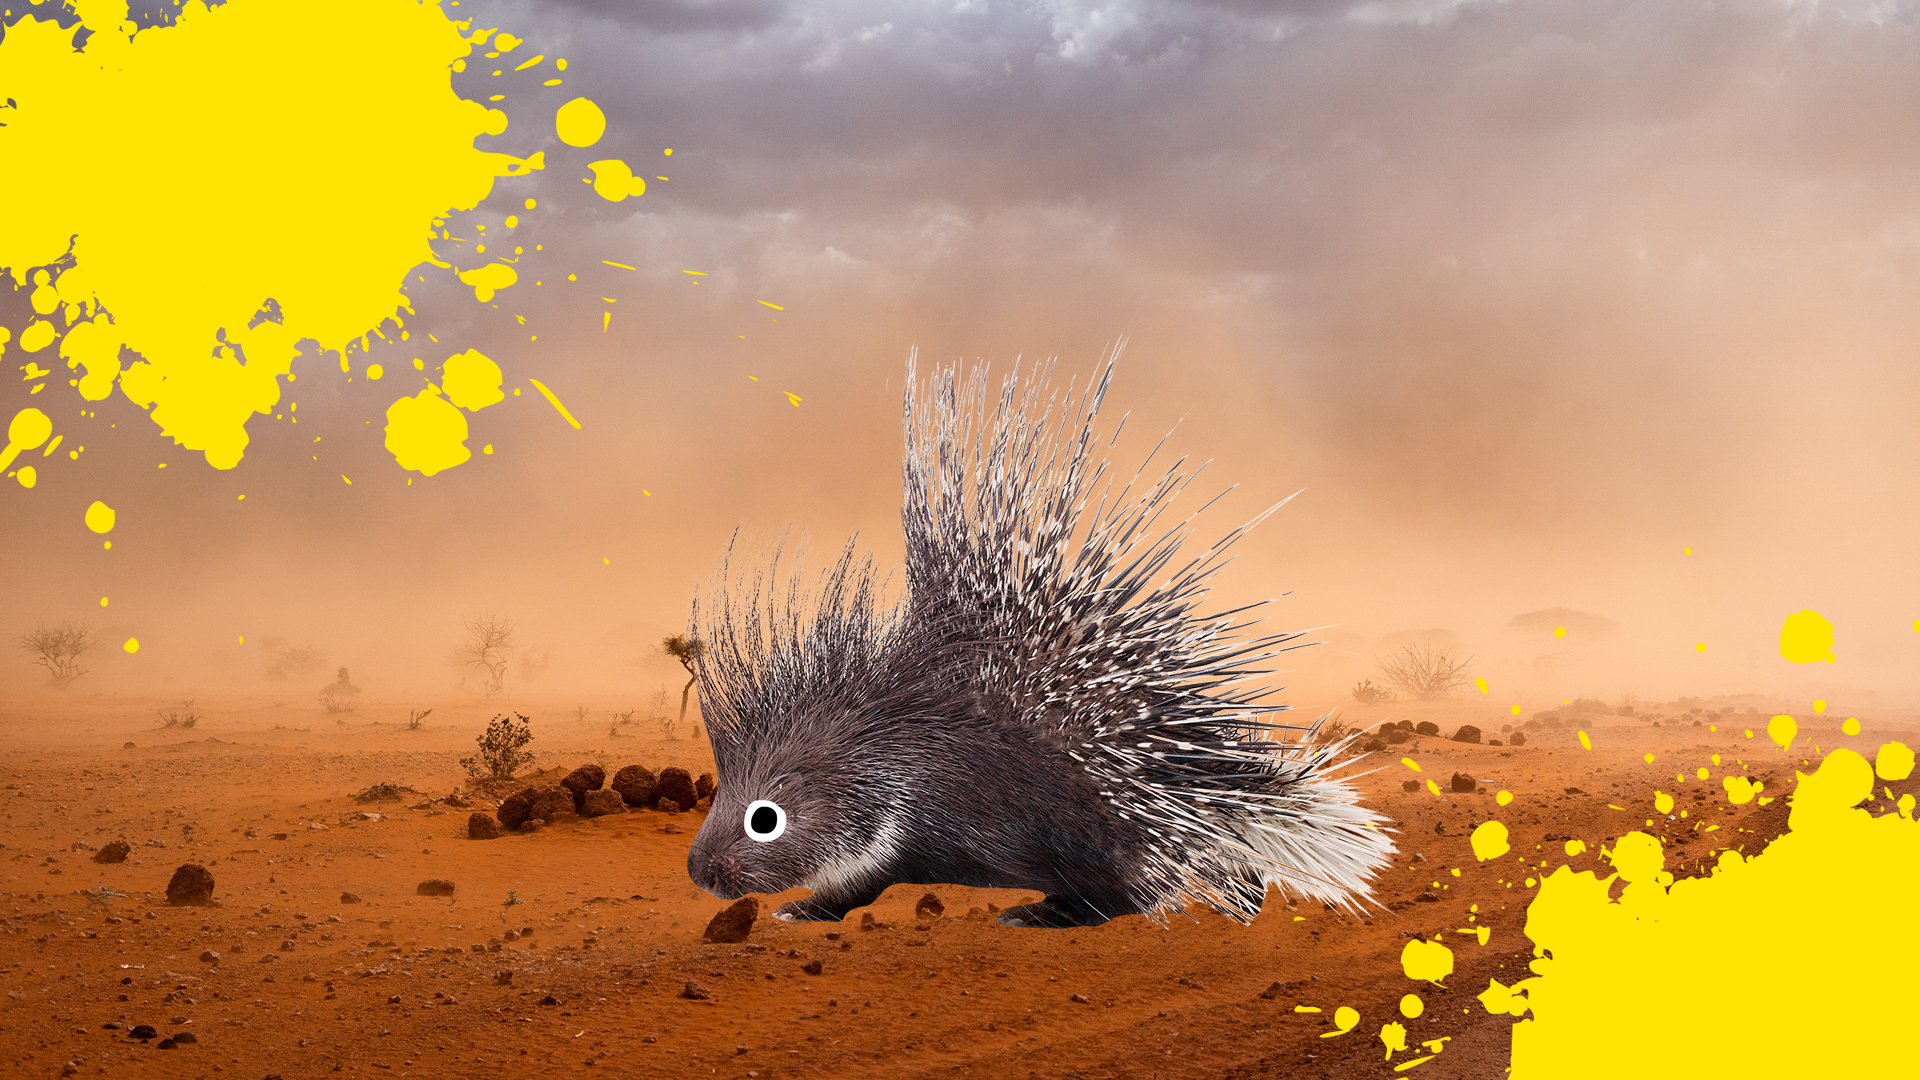 Porcupine in the desert with splats